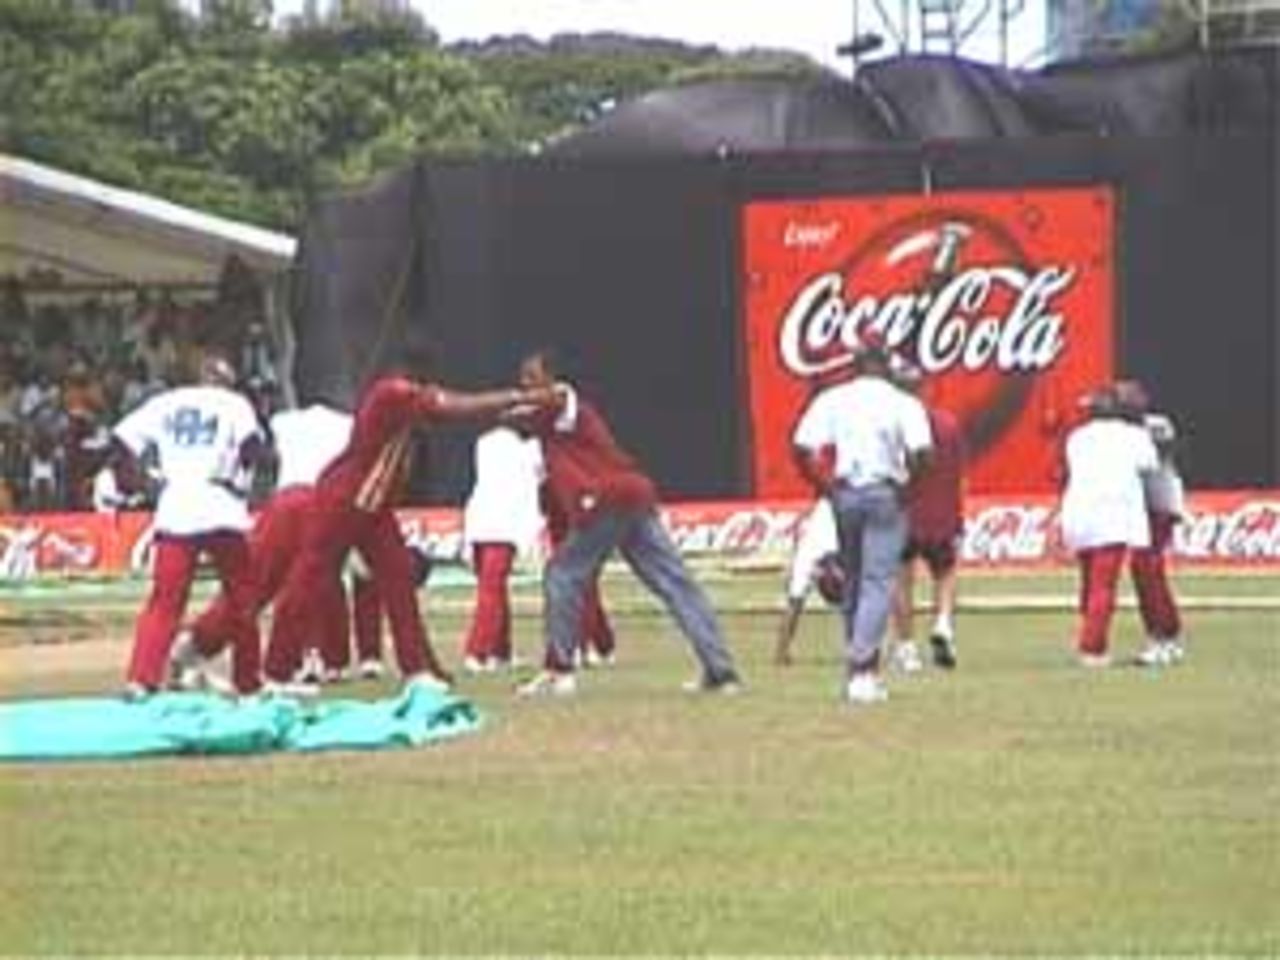 West Indies warming up, India v West Indies (3rd ODI), Coca-Cola Singapore Challenge, 1999-2000, Kallang Ground, Singapore, 5 Sep 1999.